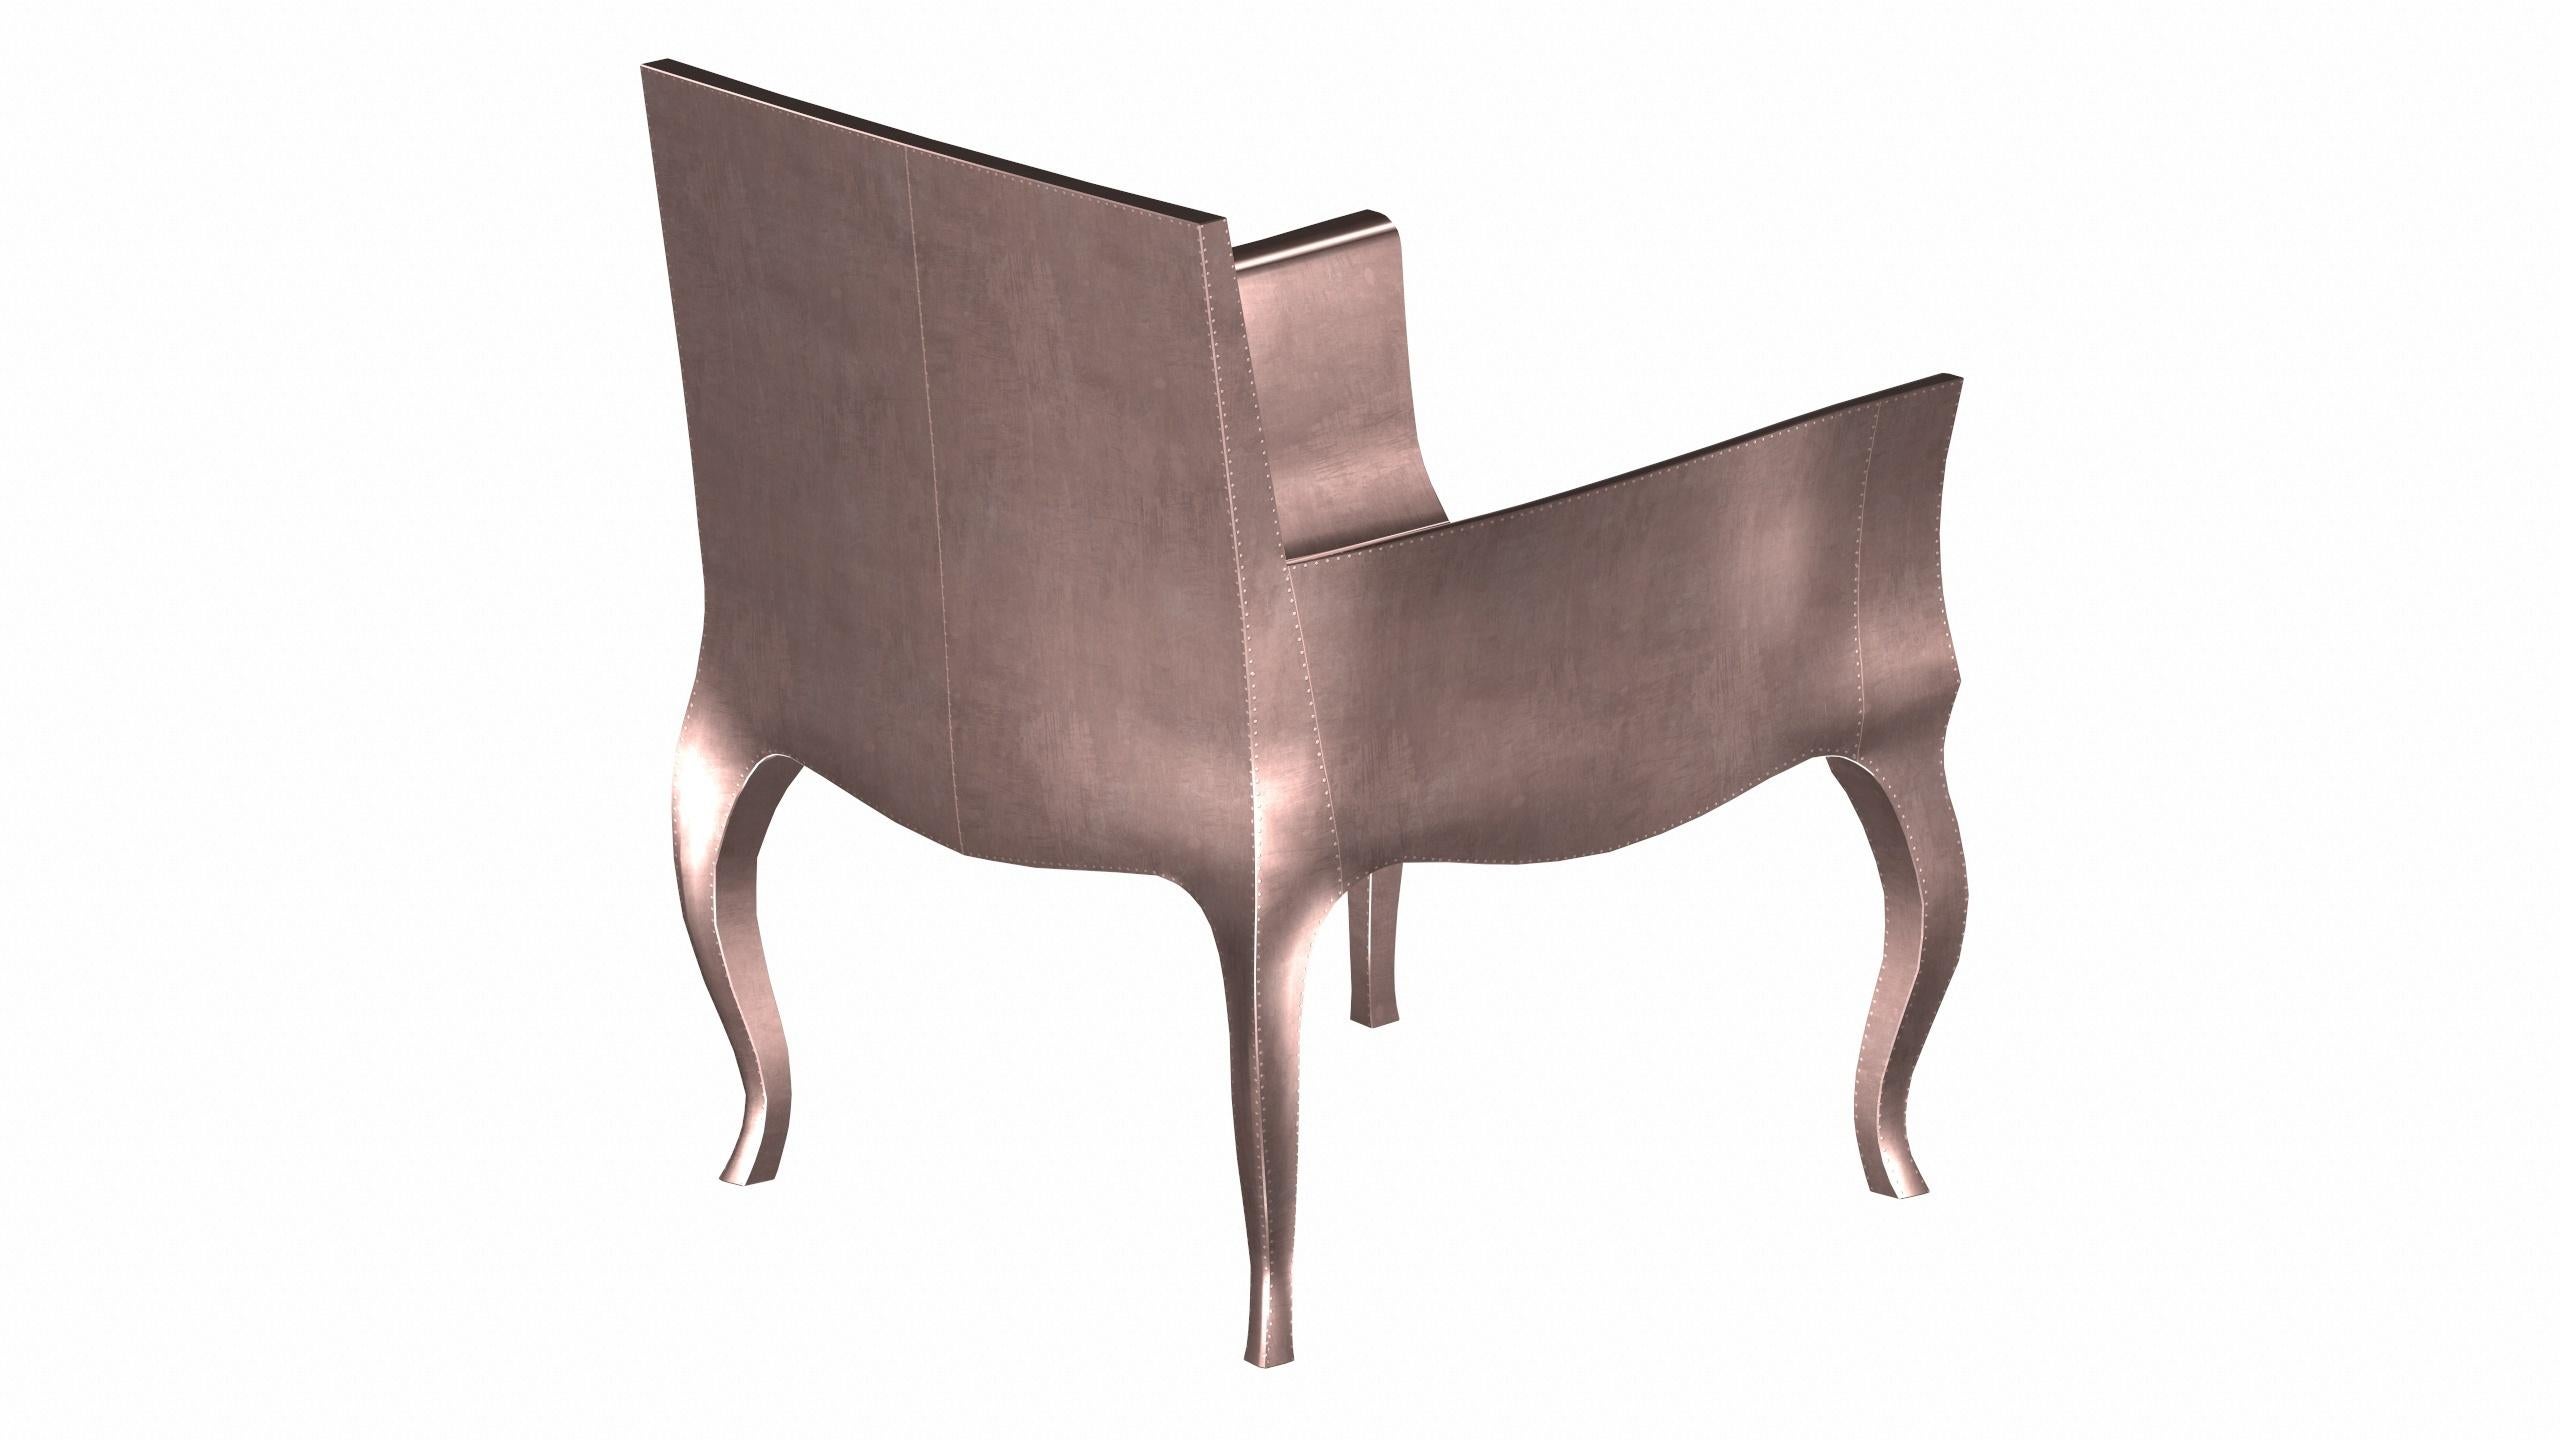 Indian Art Deco Side Chairs in Smooth Copper by Paul Mathieu for S. Odegard For Sale